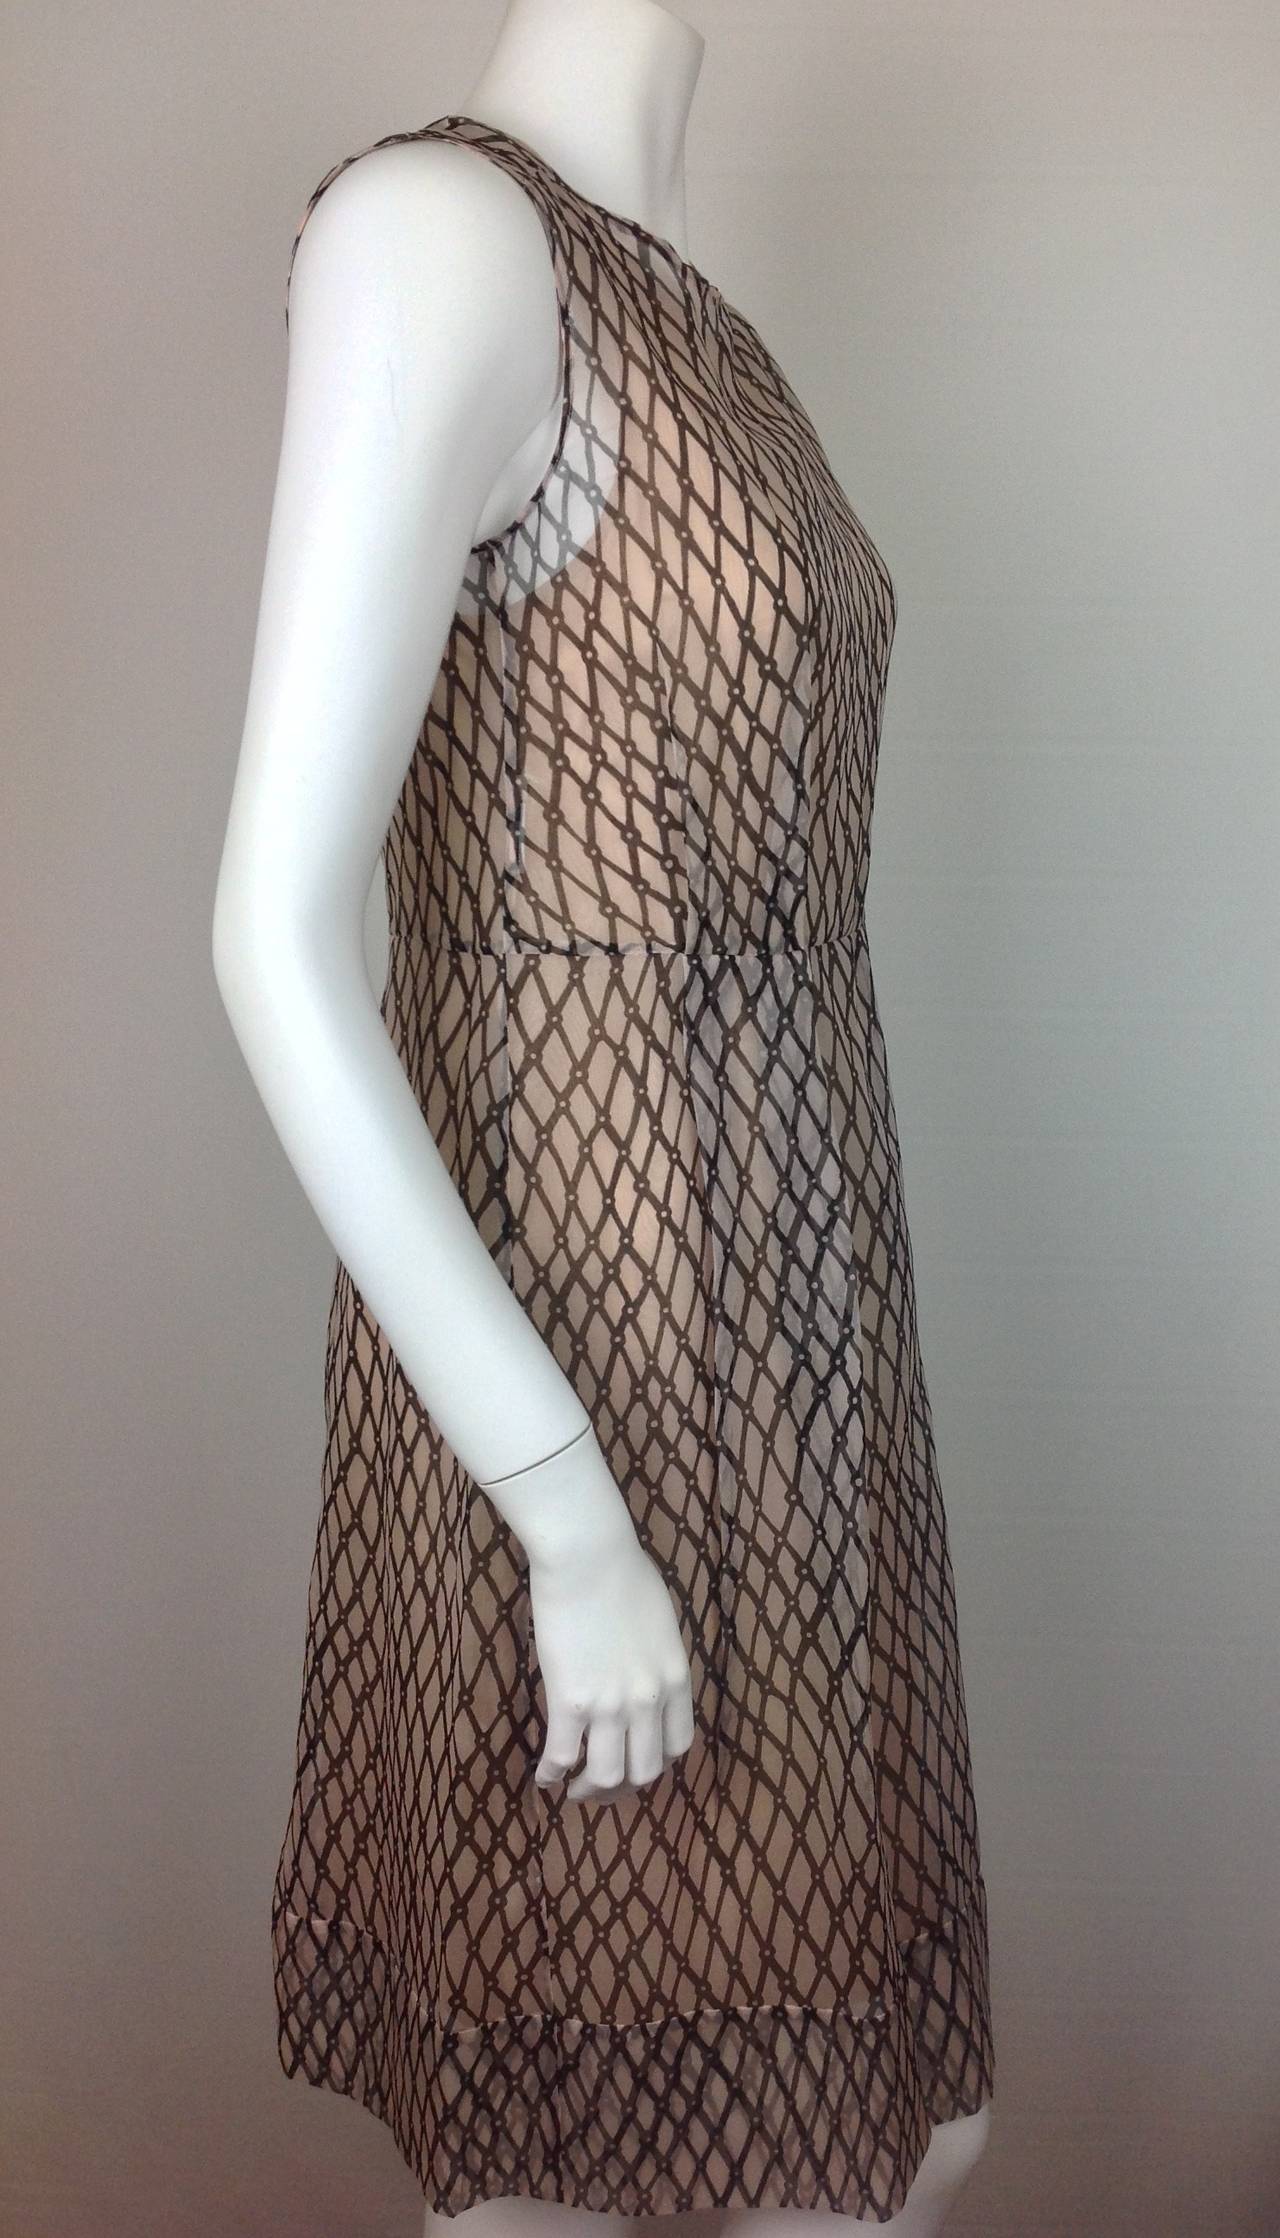 Marni sheer dress with flesh colored liner.  Graphic print on beige sheer fabric.
Flesh colored silk liner underneath.  19